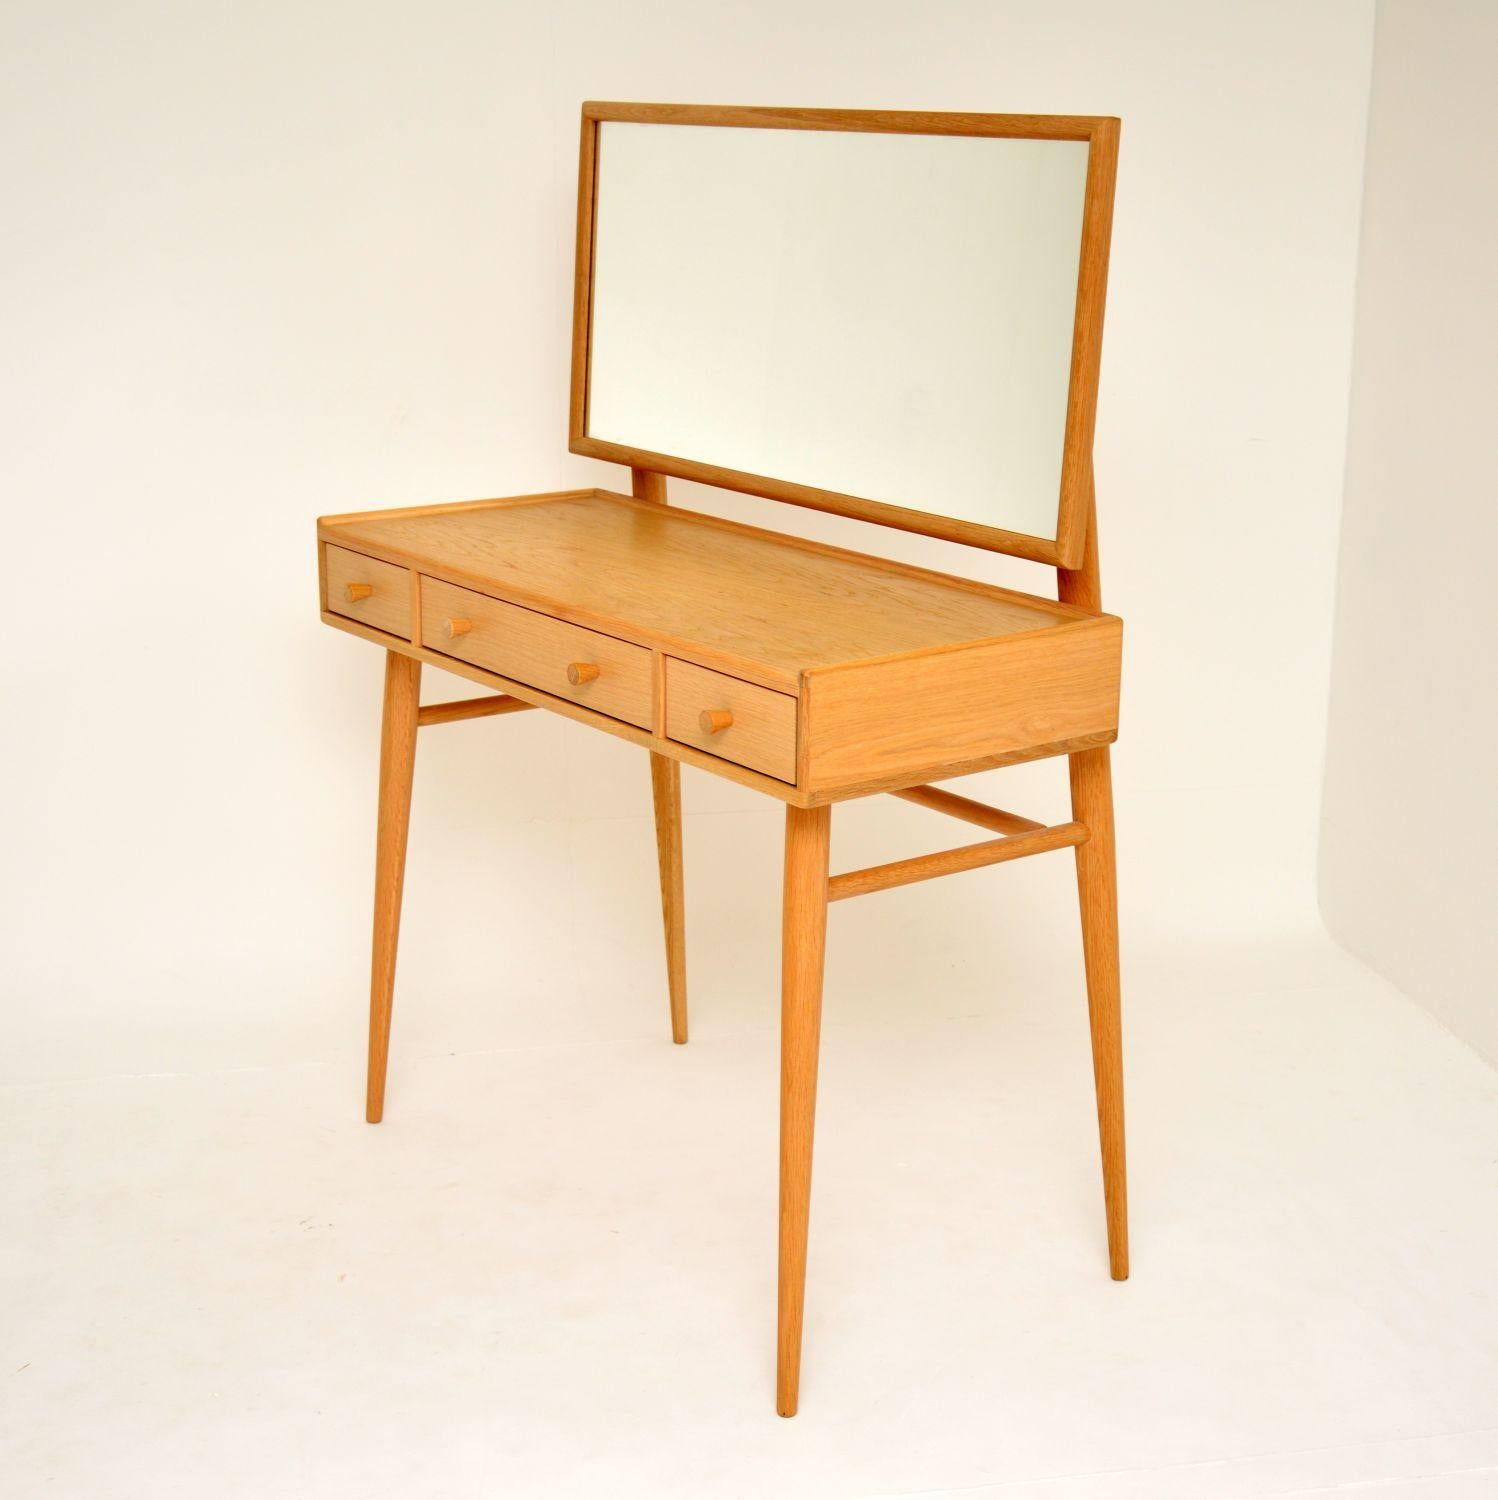 A stylish and top quality solid oak dressing table by Ercol. This is one of their more modern designs, dating from the early 21st century.

As with all Ercol products, the quality is amazing. It has a beautiful and elegant design, with fabulous